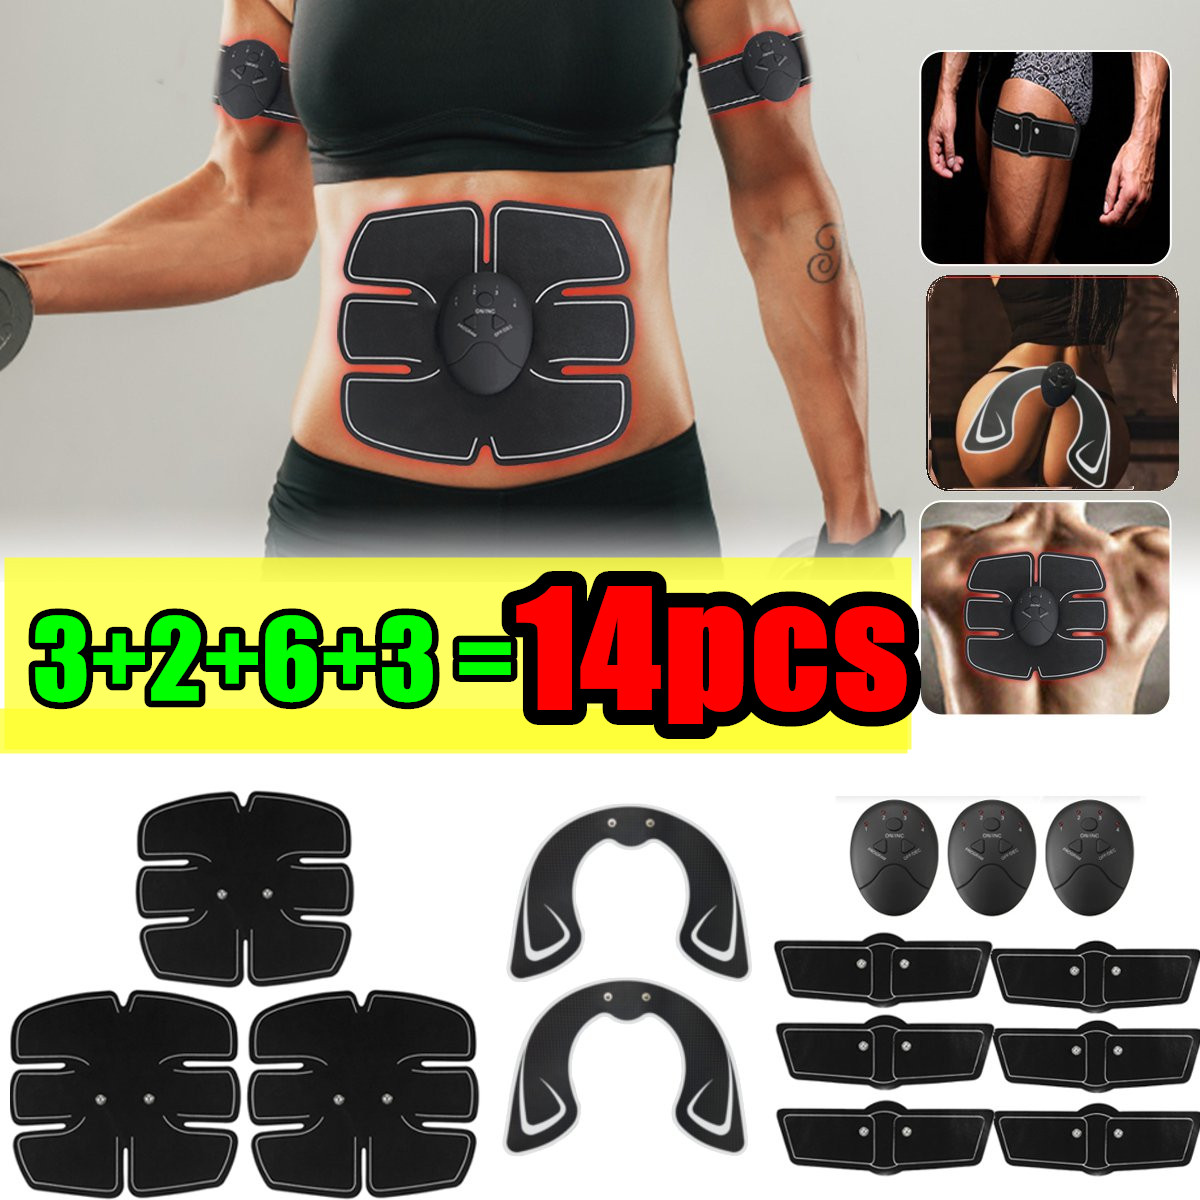 KALOAD-14pcs-Muscle-Training-Gear-Hip-Buttocks-Lifting-ABS-Fitness-Exercise-Hip-Trainer-Stimulator-1401361-2